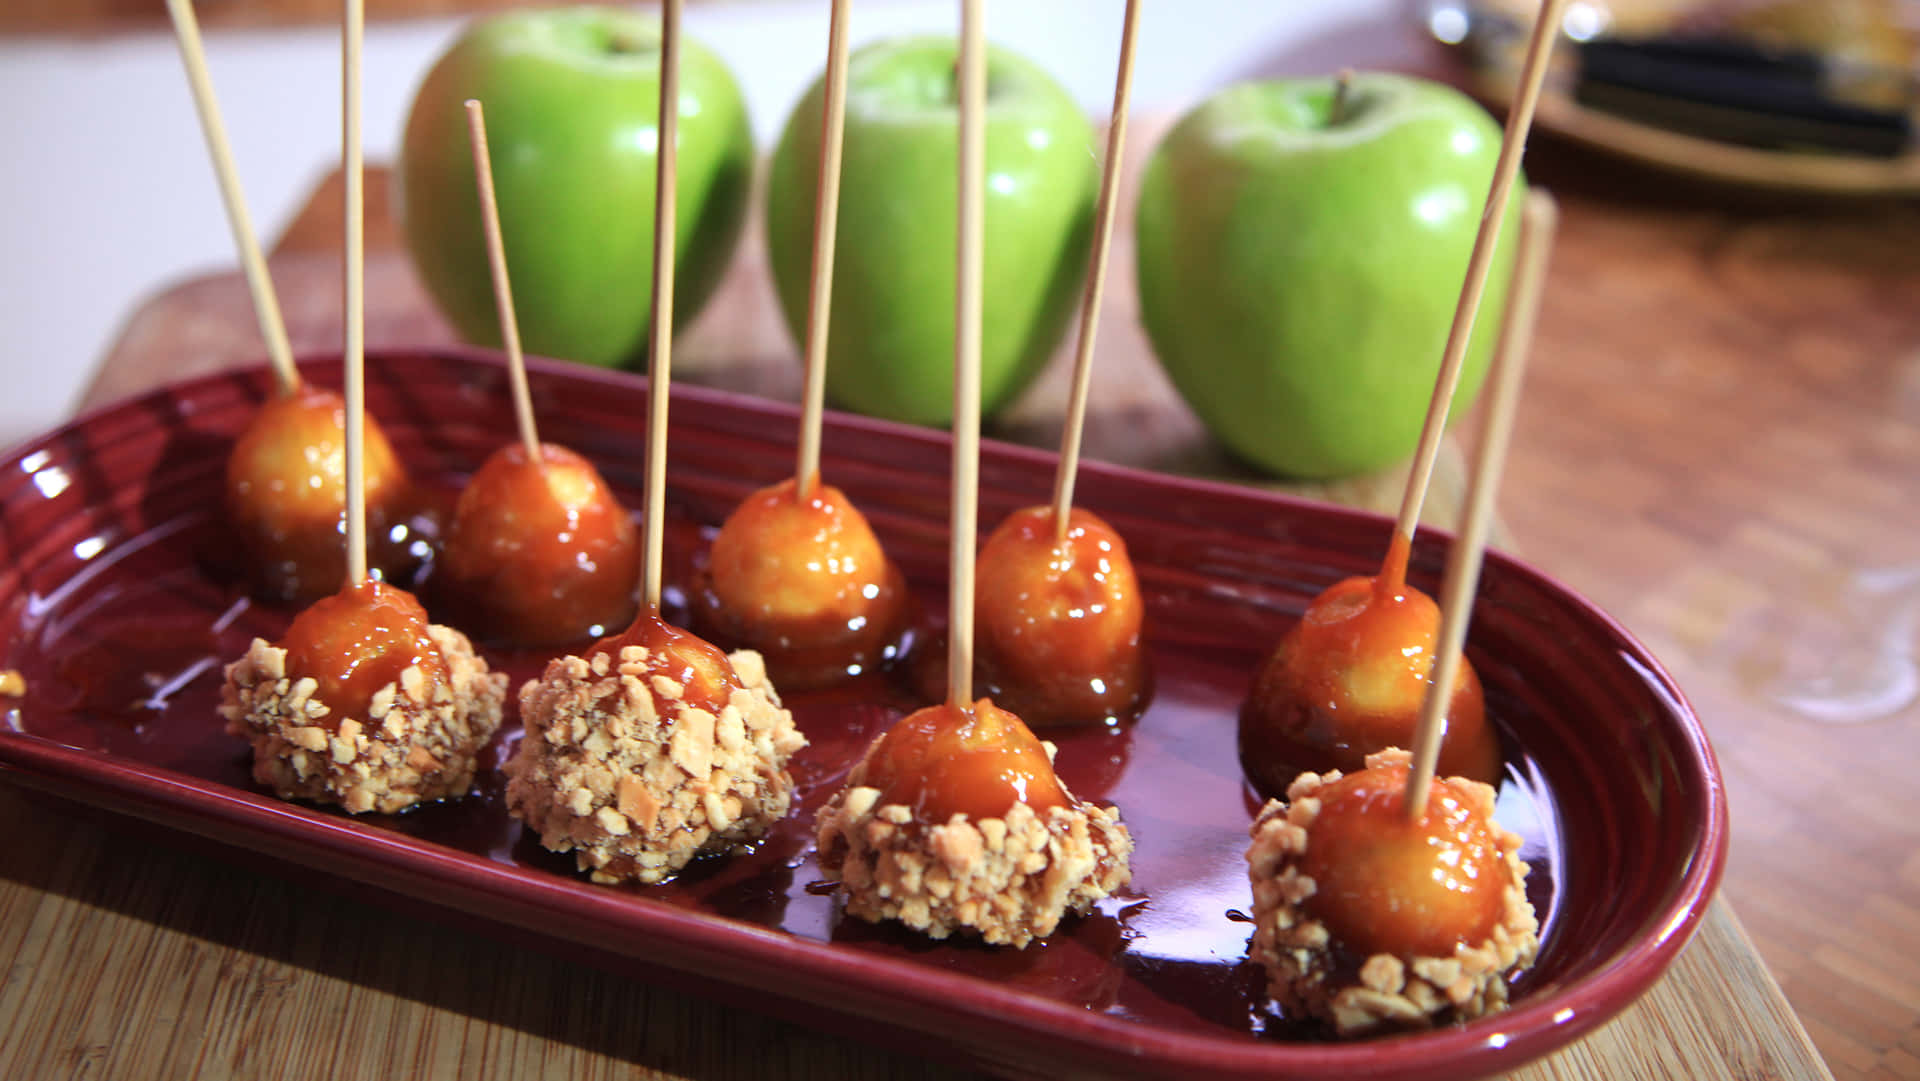 Gourmet Caramel Apples on a Rustic Wooden Table Wallpaper